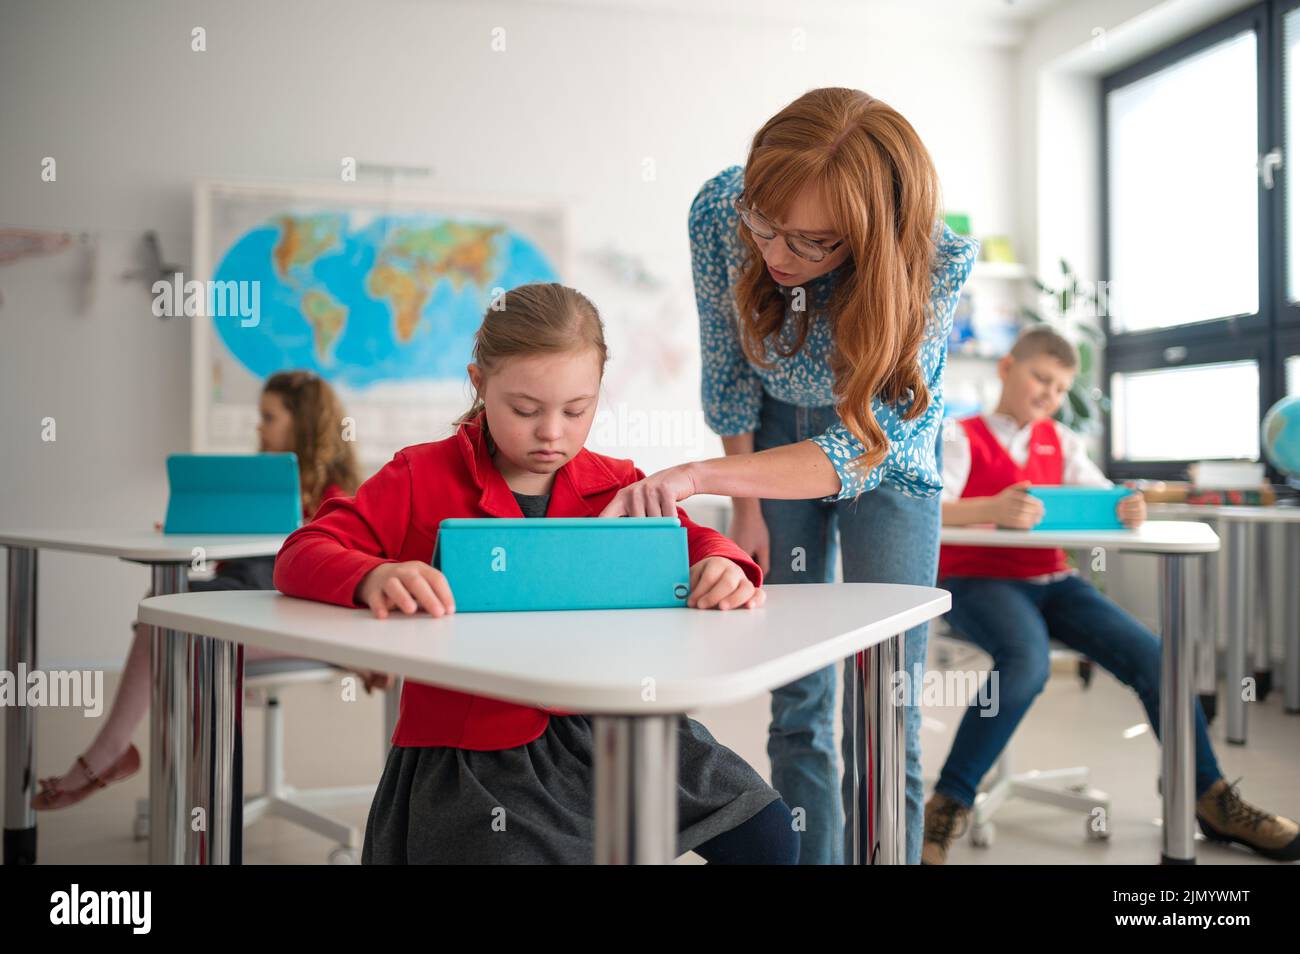 Down syndrome schoolgirl using tablet with help of teacher during class at school, integration concept. Stock Photo